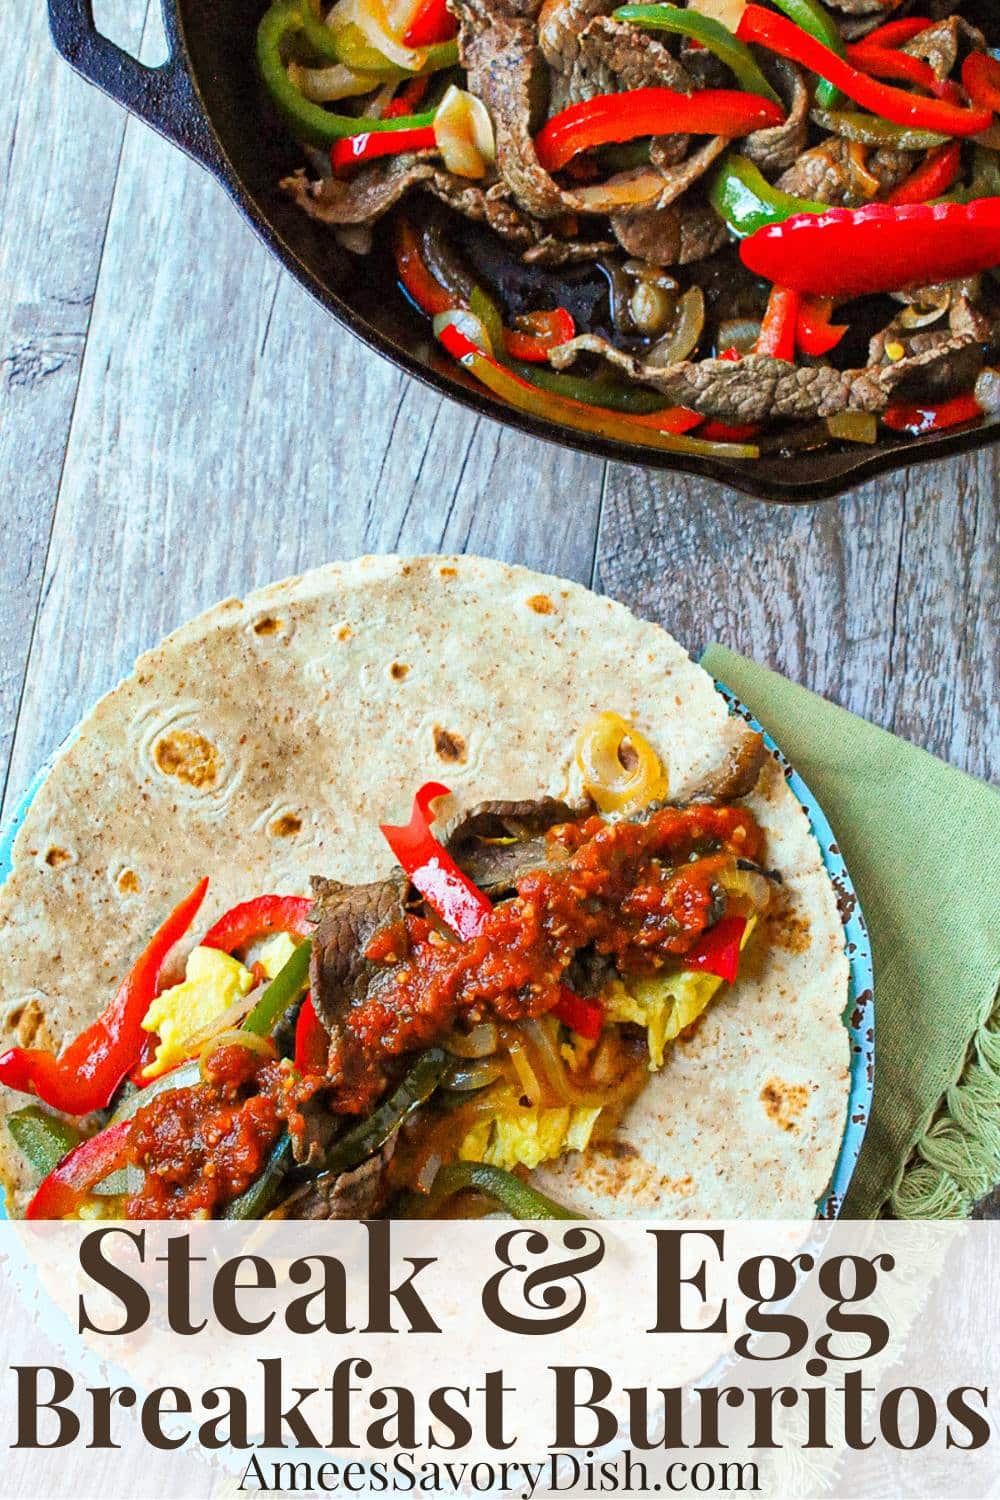 This Steak and Egg Burrito recipe delivers sizzling steak, onions, peppers, cheesy scrambled eggs, and tasty toppings wrapped in your favorite tortilla. via @Ameessavorydish